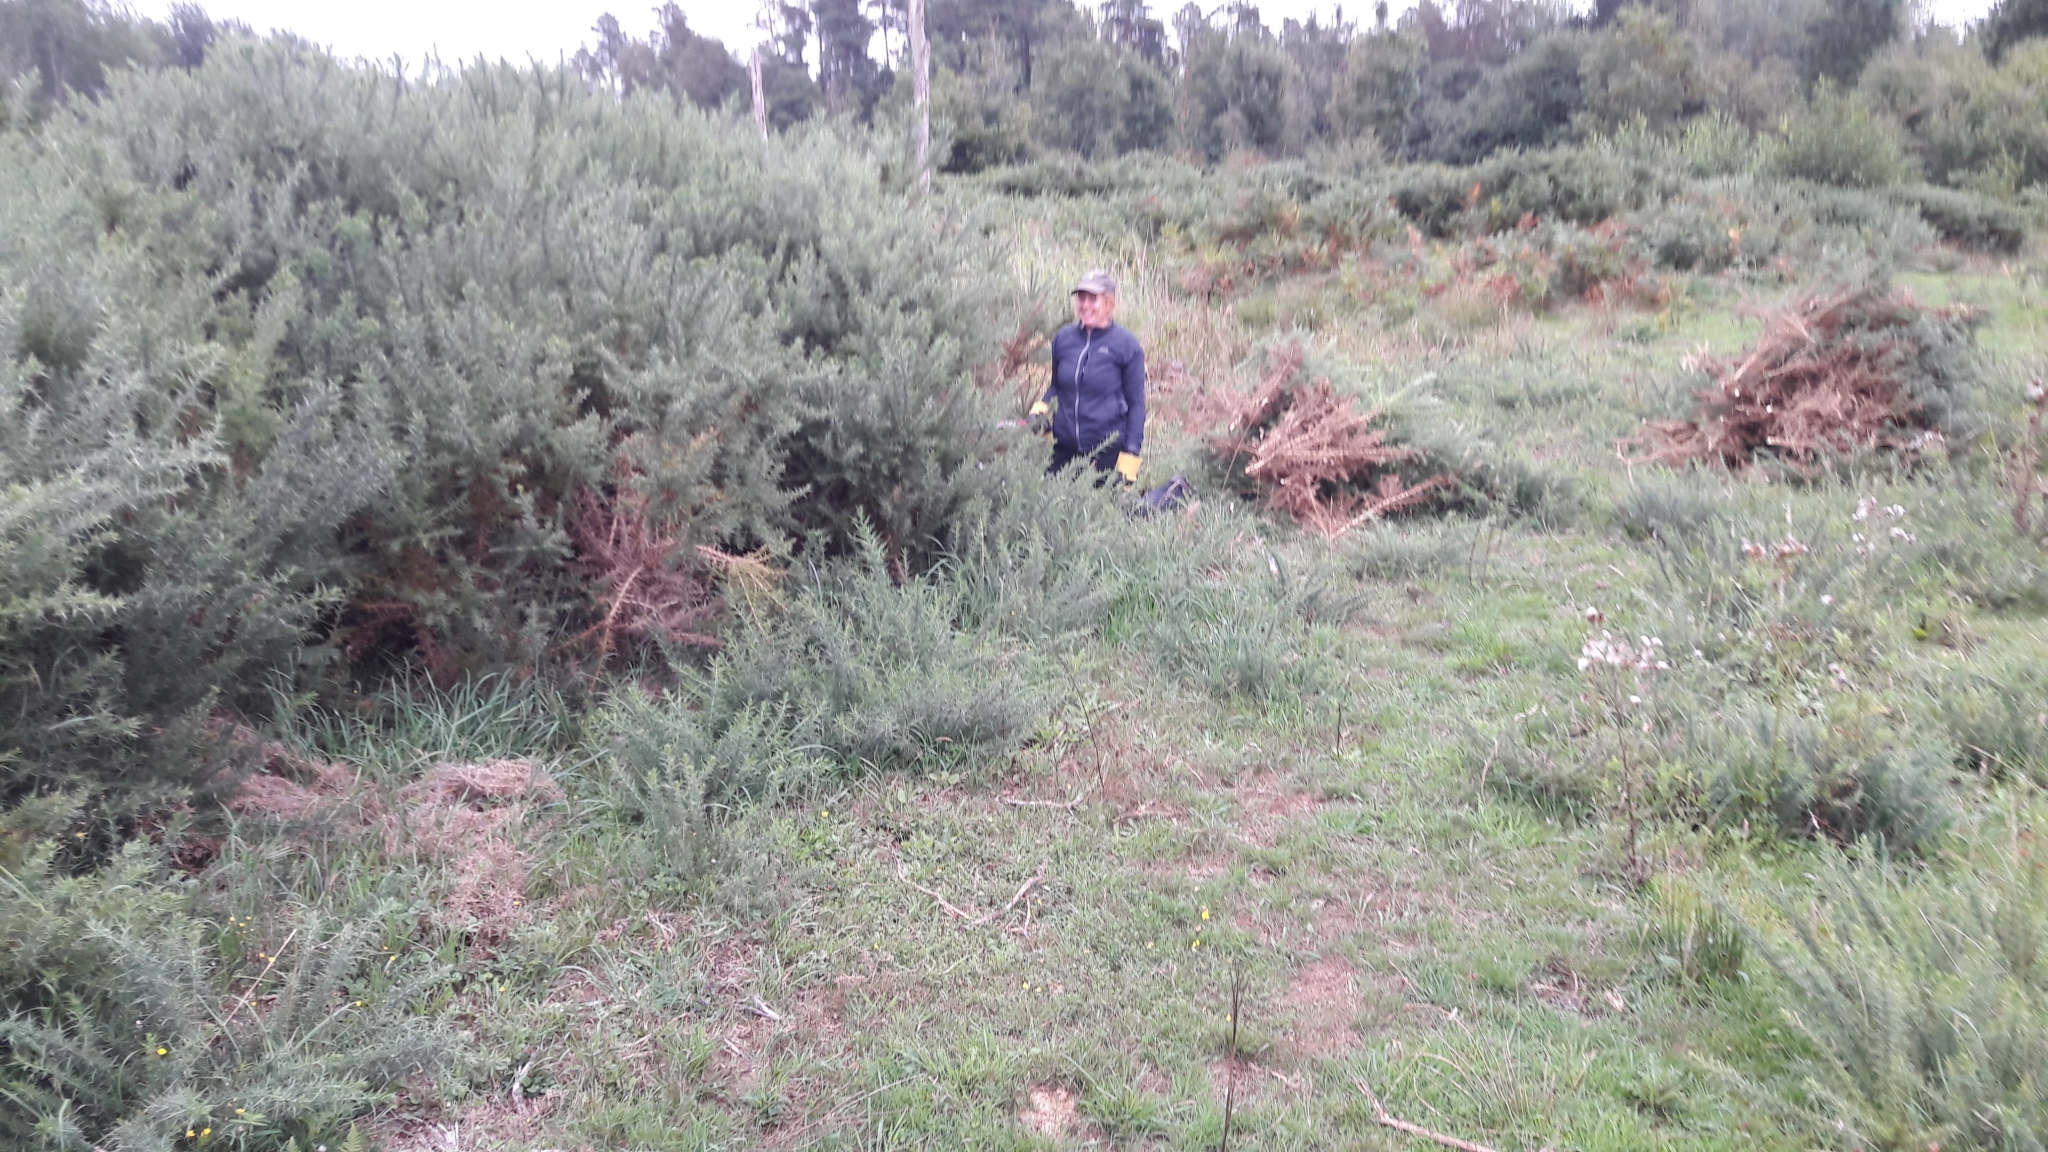 A photo from the FoTF Conservation Event - August 2018 - Gorse Removal at Hockham Hills & Holes : A volunterr kneels beside a Gorse bush